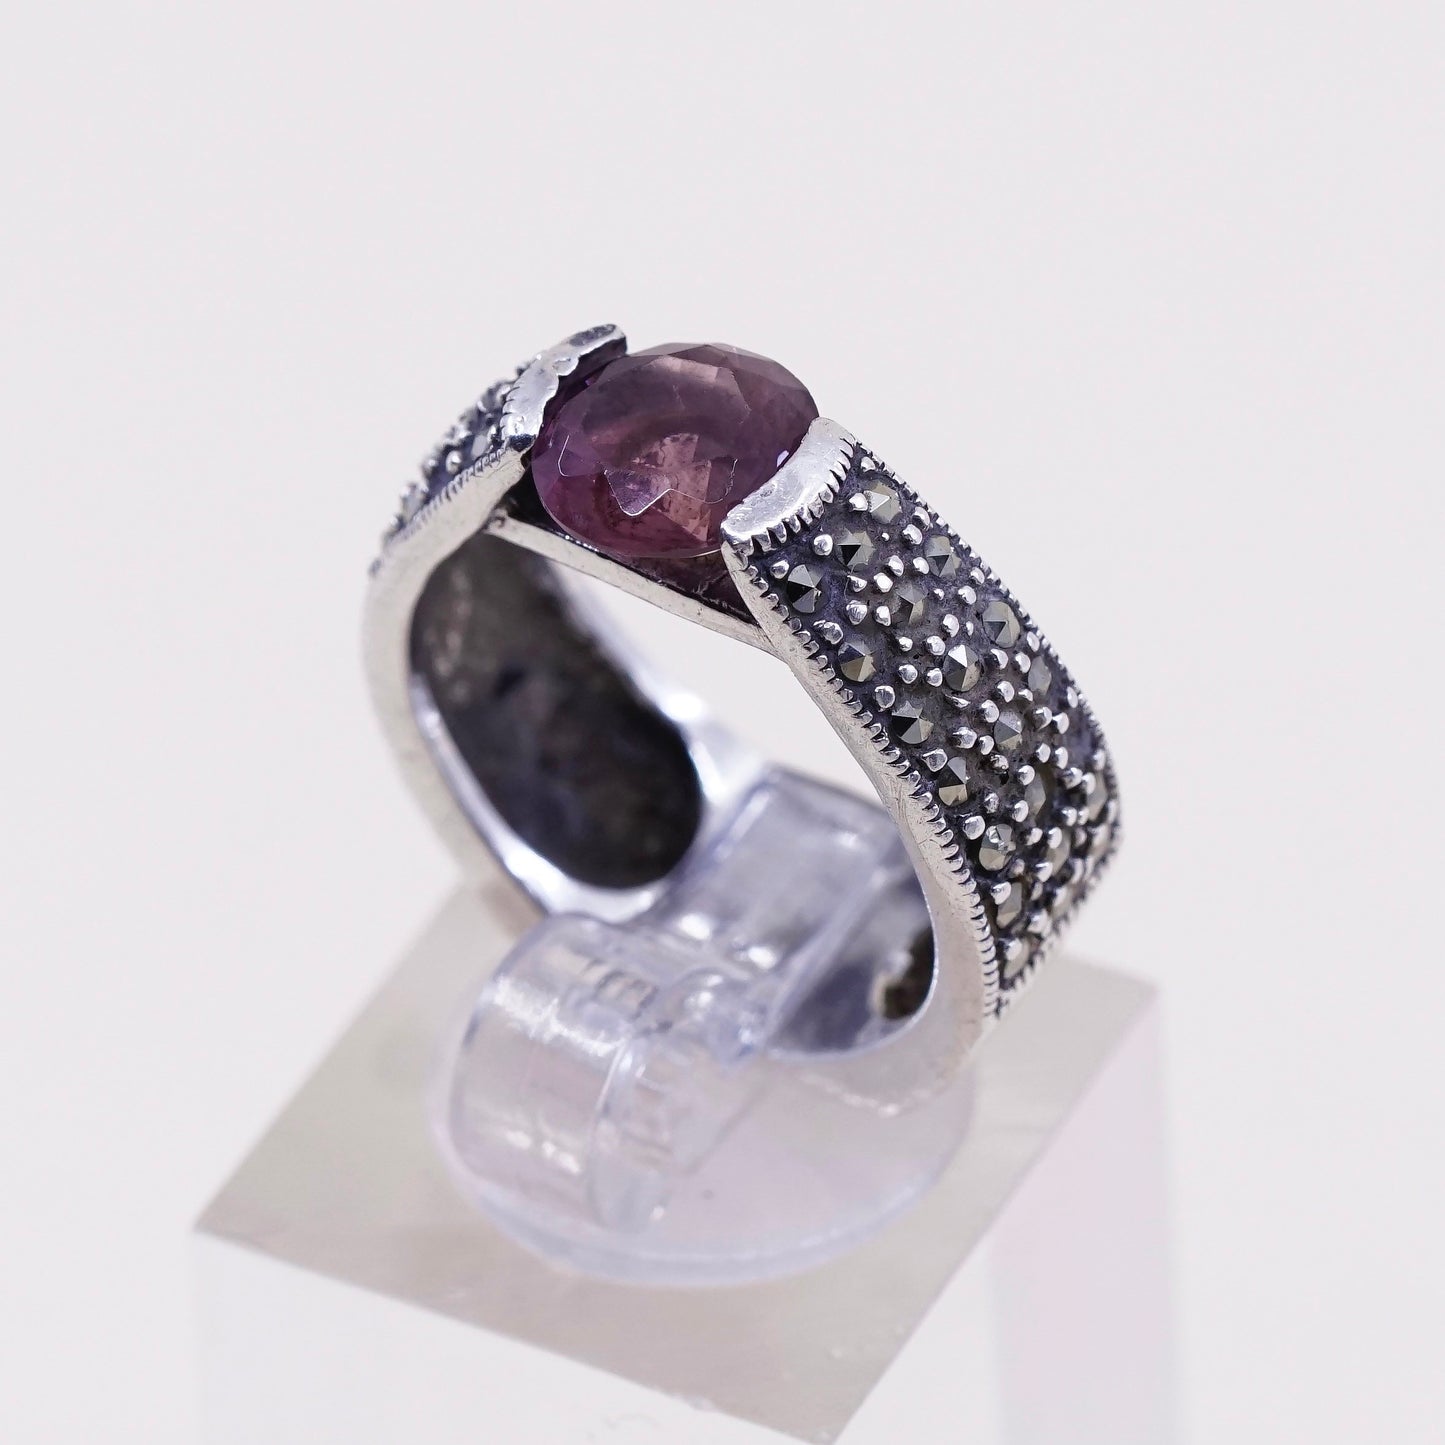 sz 5.5, Vintage sterling 925 silver handmade ring with amethyst and marcasite